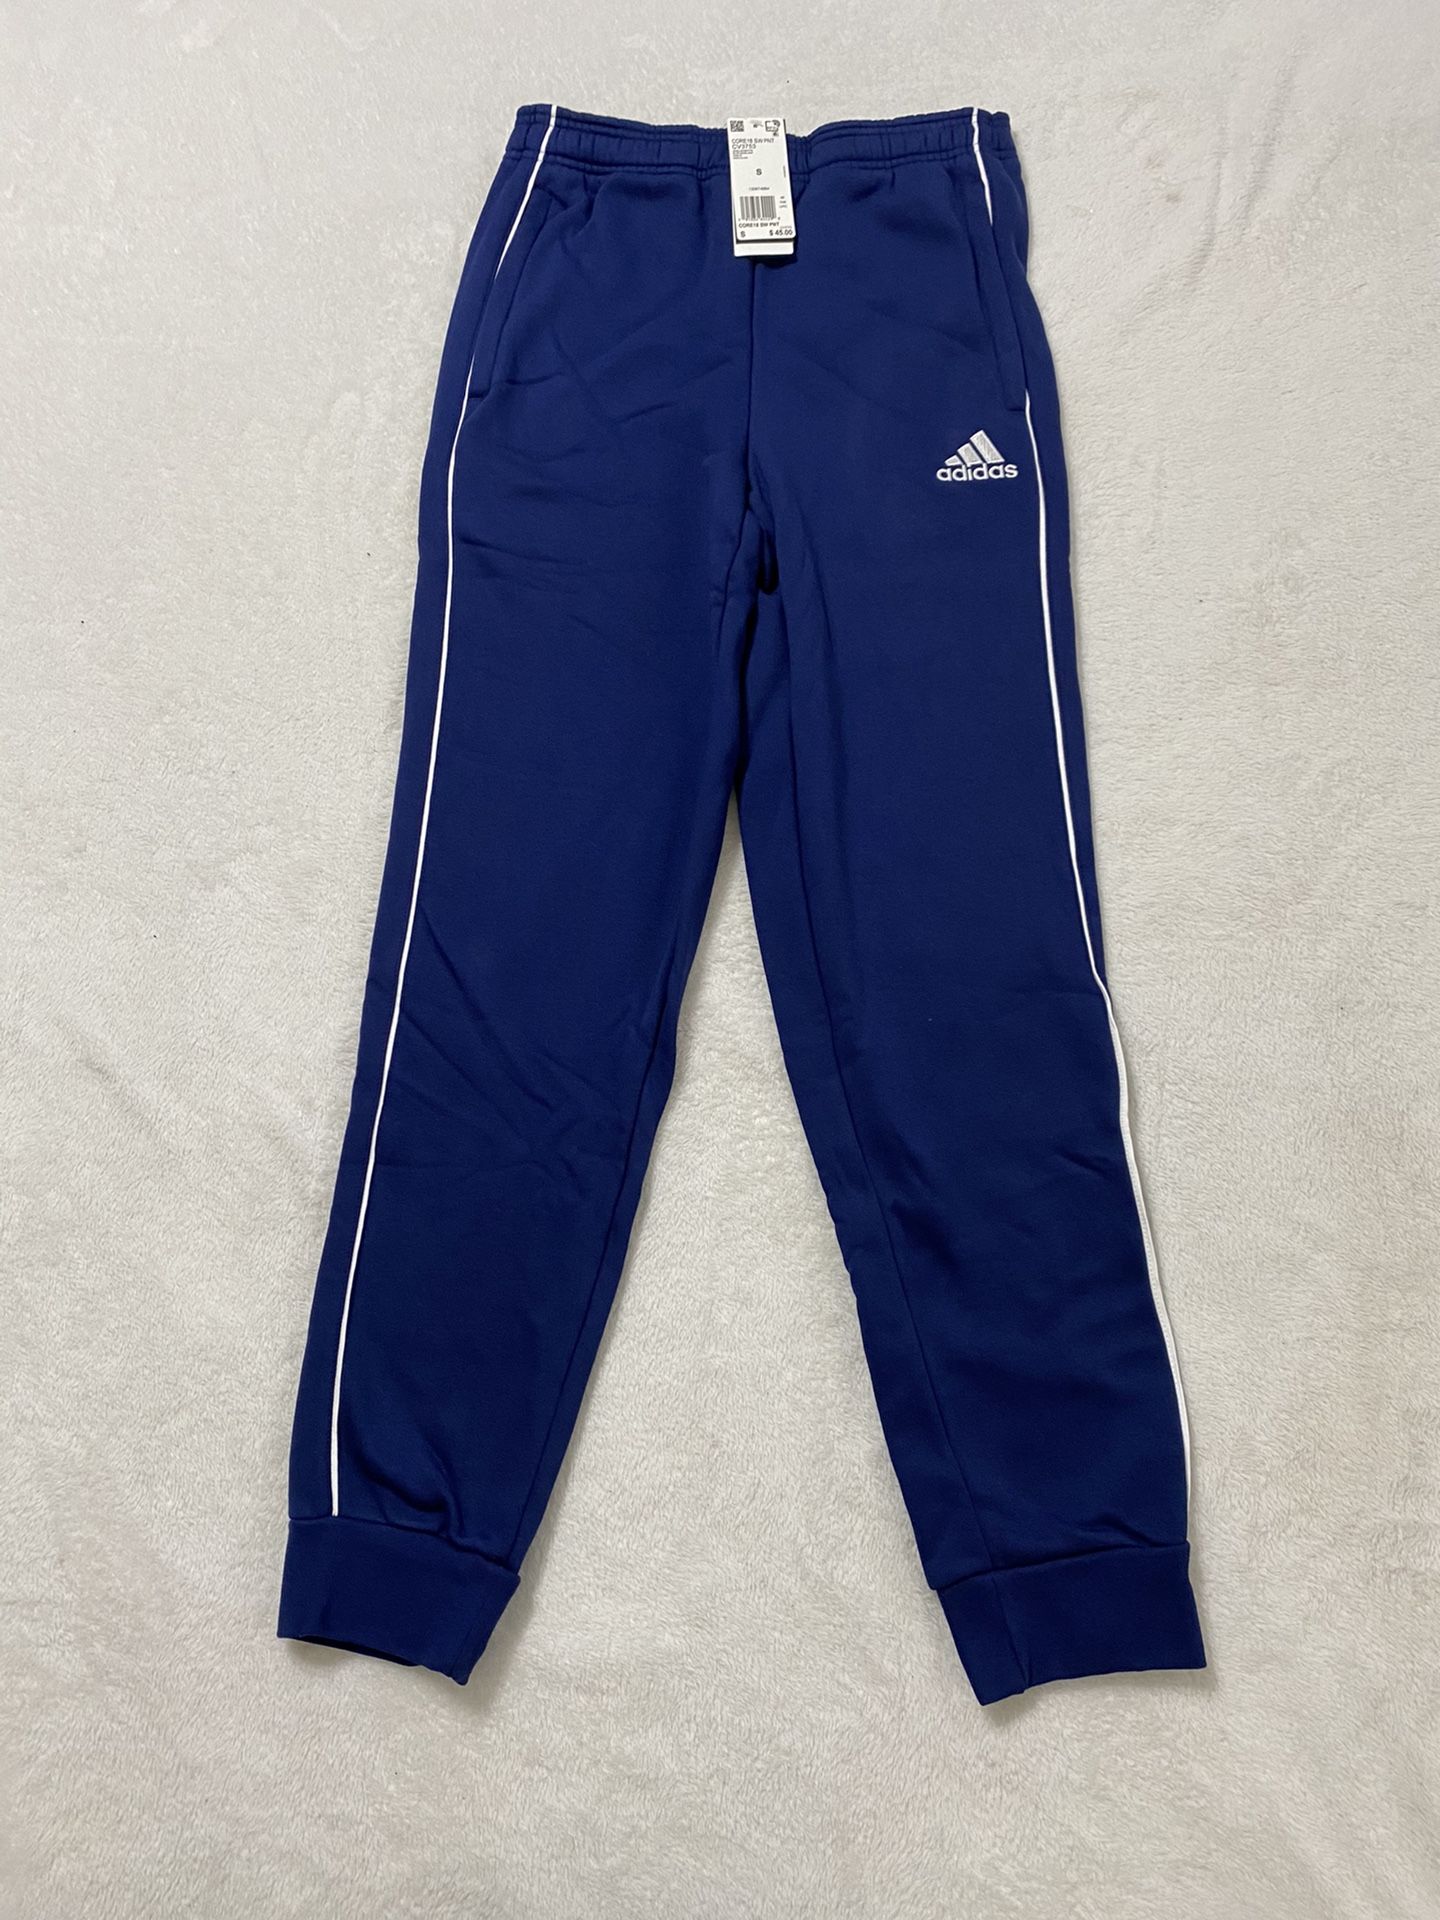 Adidas fleece sweat pants tapered joggers men’s size small